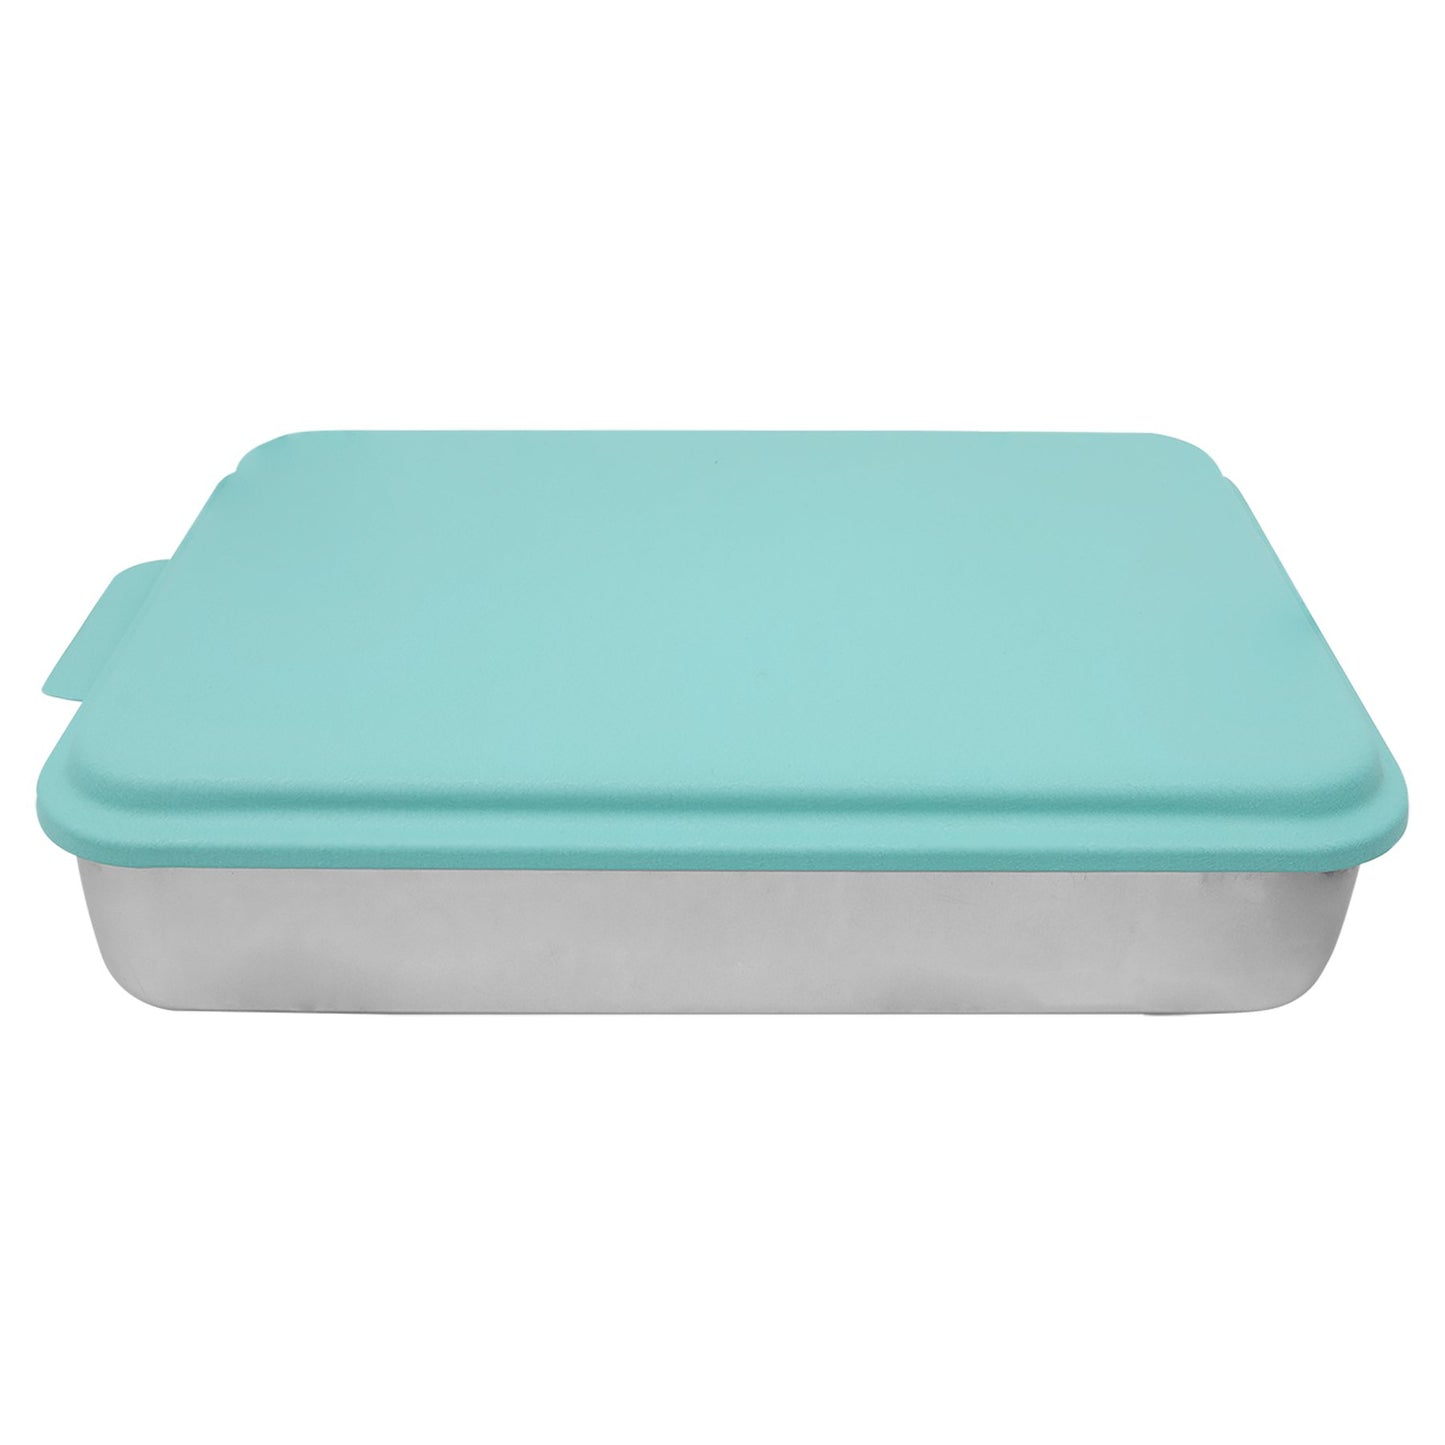 Personalized 9x13" Cake Pan with snap-on Lid - Etchified-Etchified-BPN102